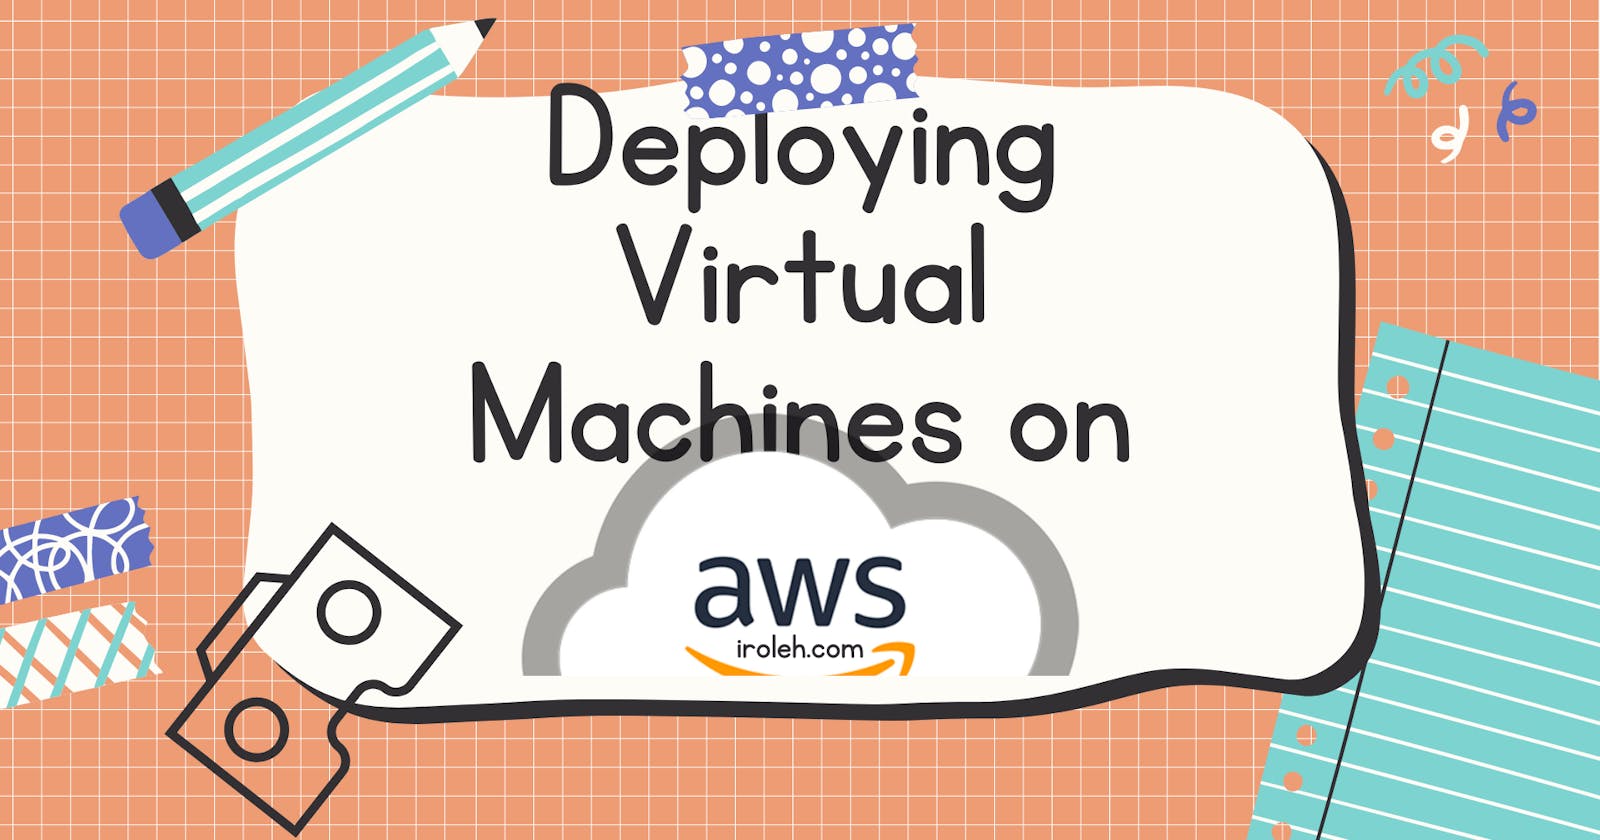 Create and deploy a Virtual Machine running windows server on AWS